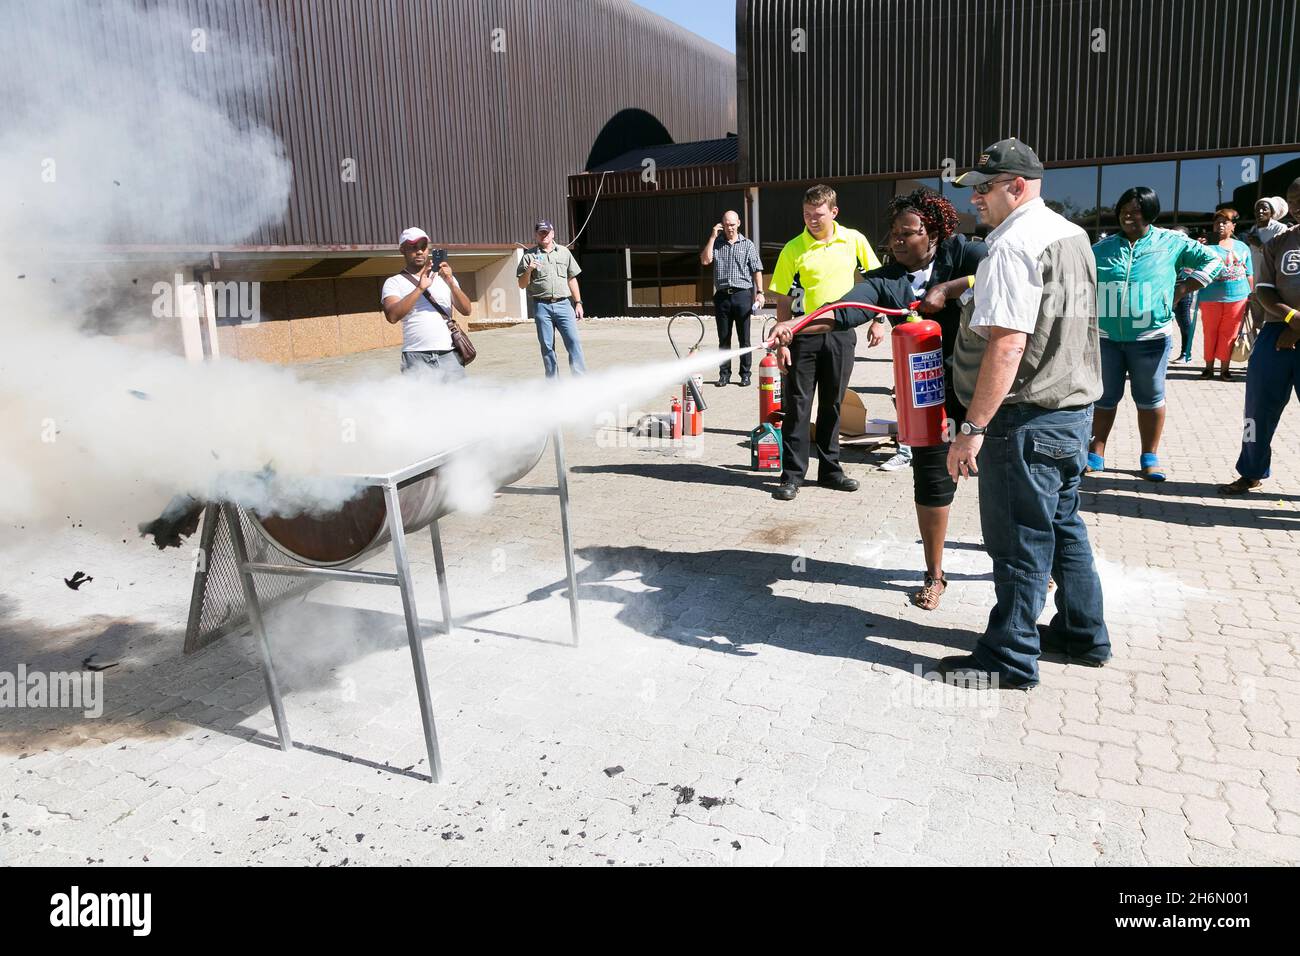 JOHANNESBURG, SOUTH AFRICA - Aug 12, 2021: Johannesburg, South Africa - November 5, 2014: Fire hazard training with a powder-based extinguisher Stock Photo